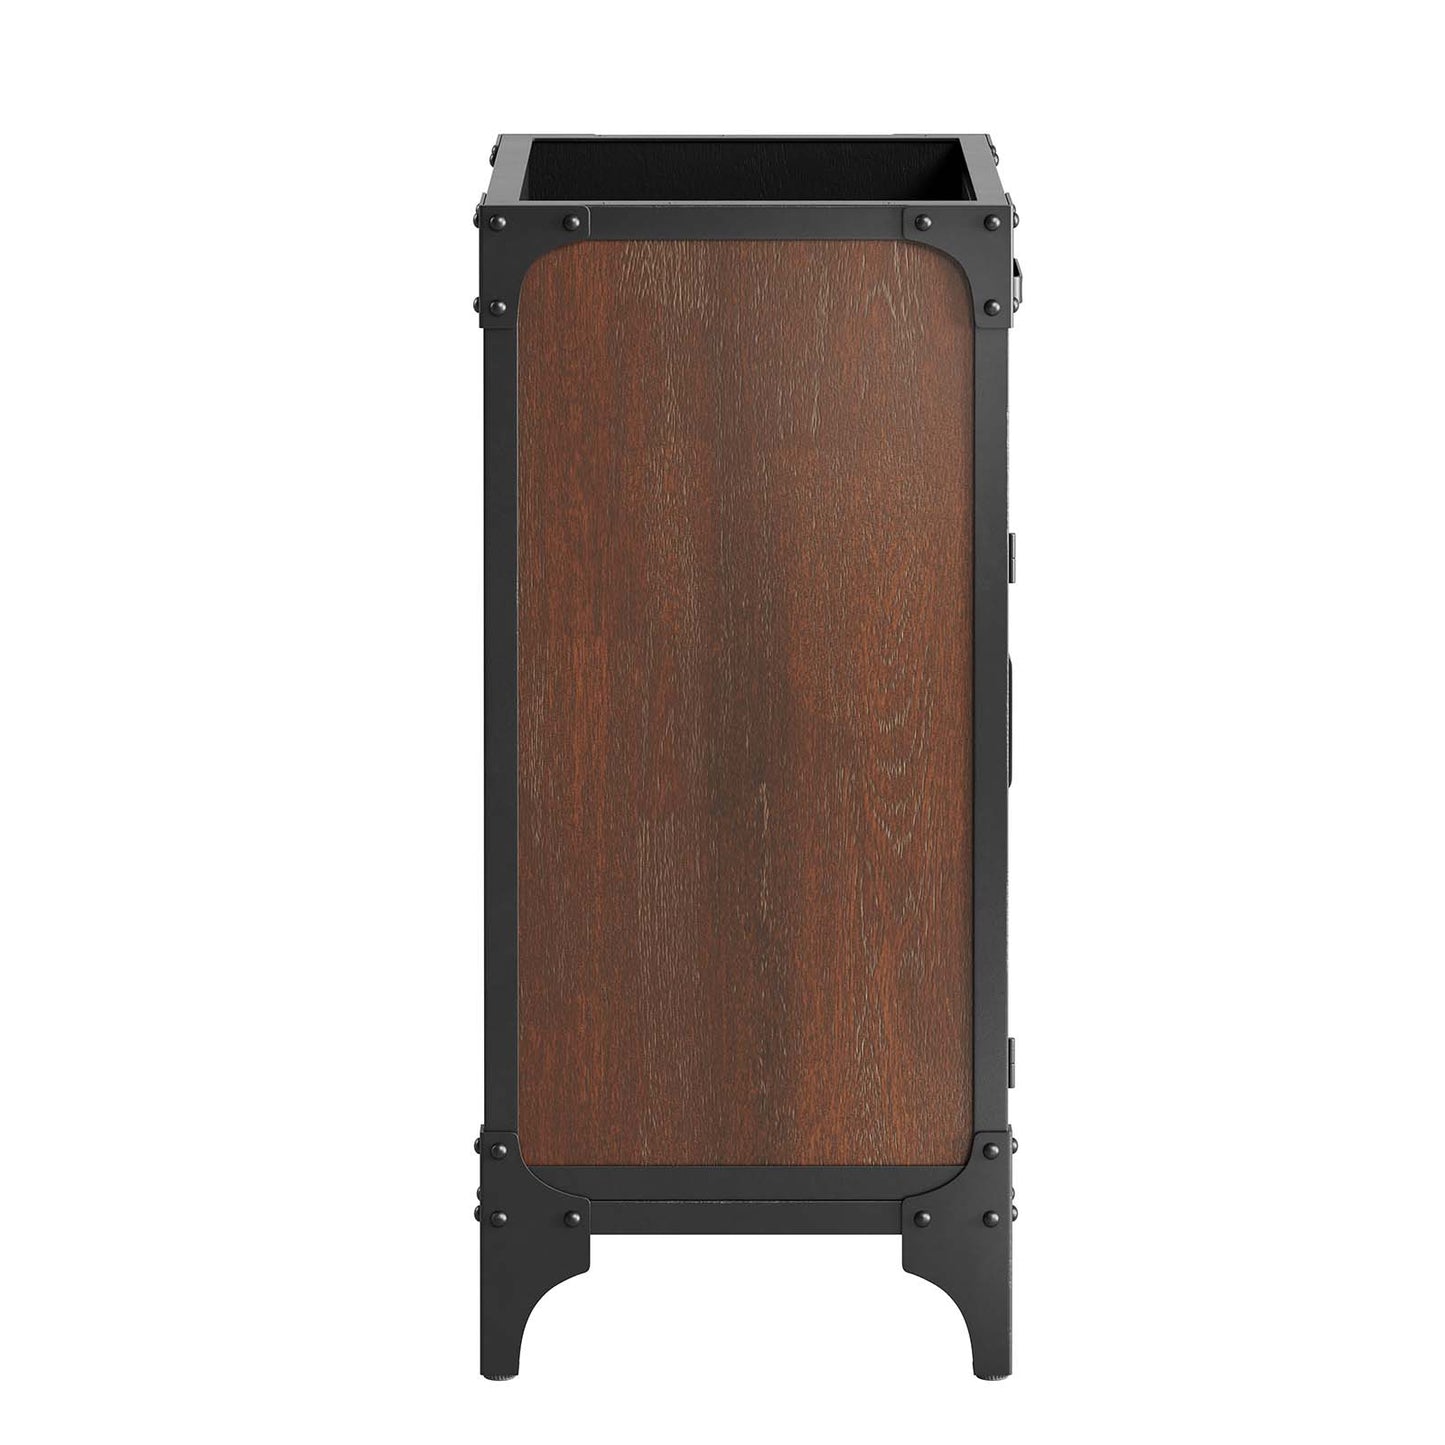 Steamforge 18" Bathroom Vanity Cabinet (Sink Basin Not Included) By Modway - EEI-6126 | Bathroom Accessories | Modway - 2